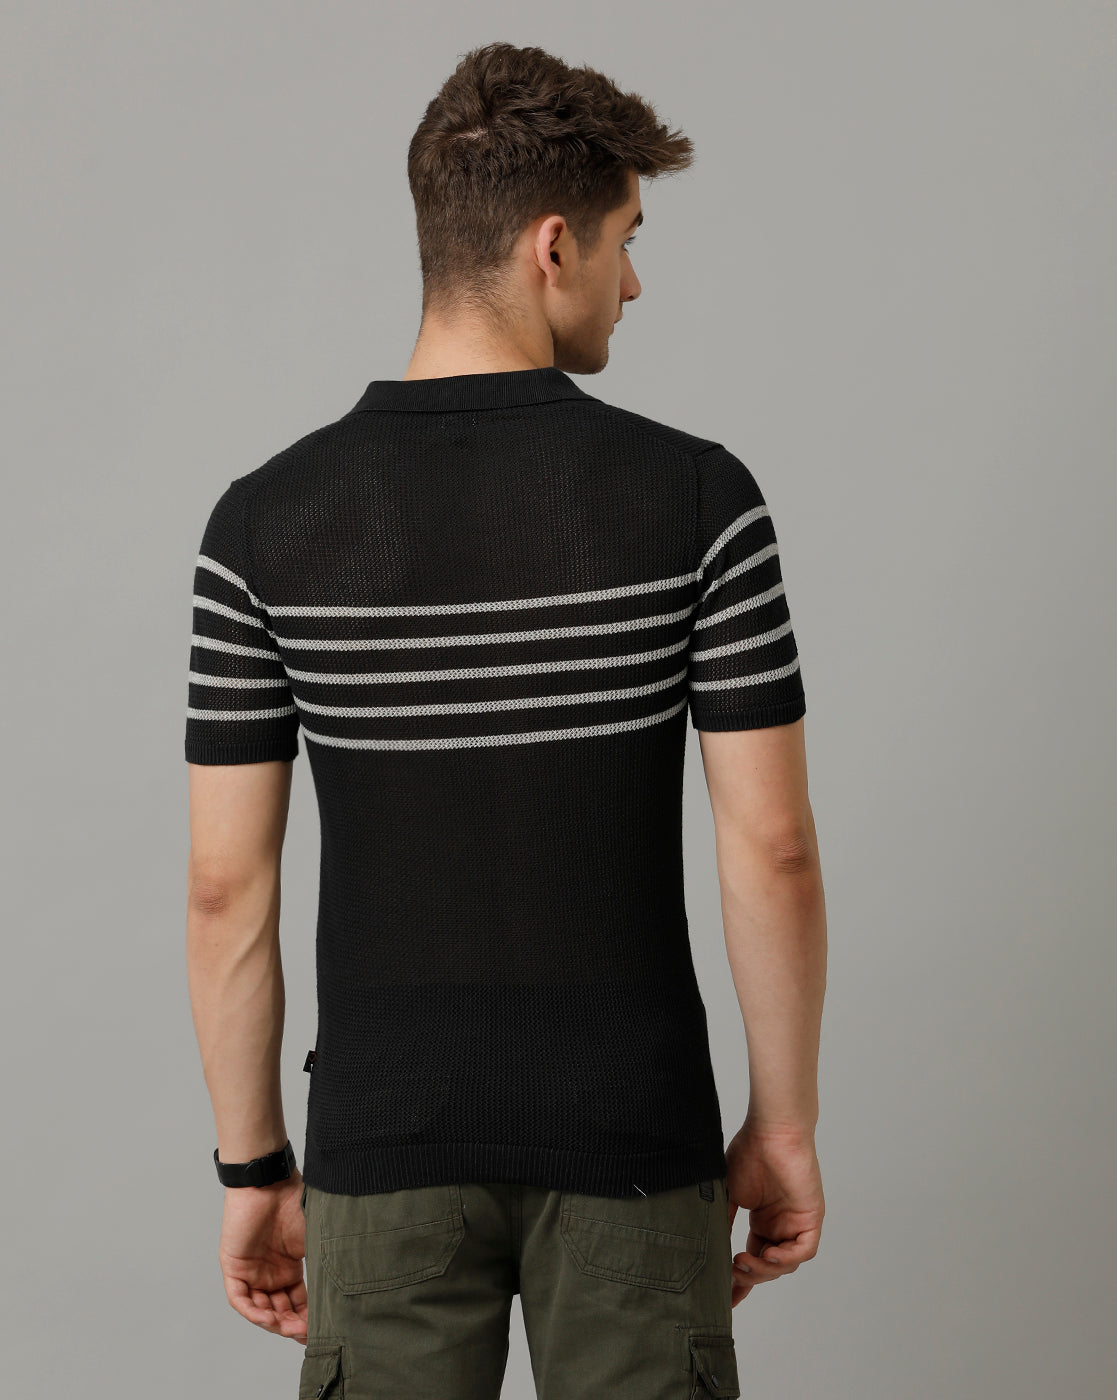 Identiti Charcoal Half Sleeve Striped Slim Fit Cotton Casual Polo T-Shirt For Men.